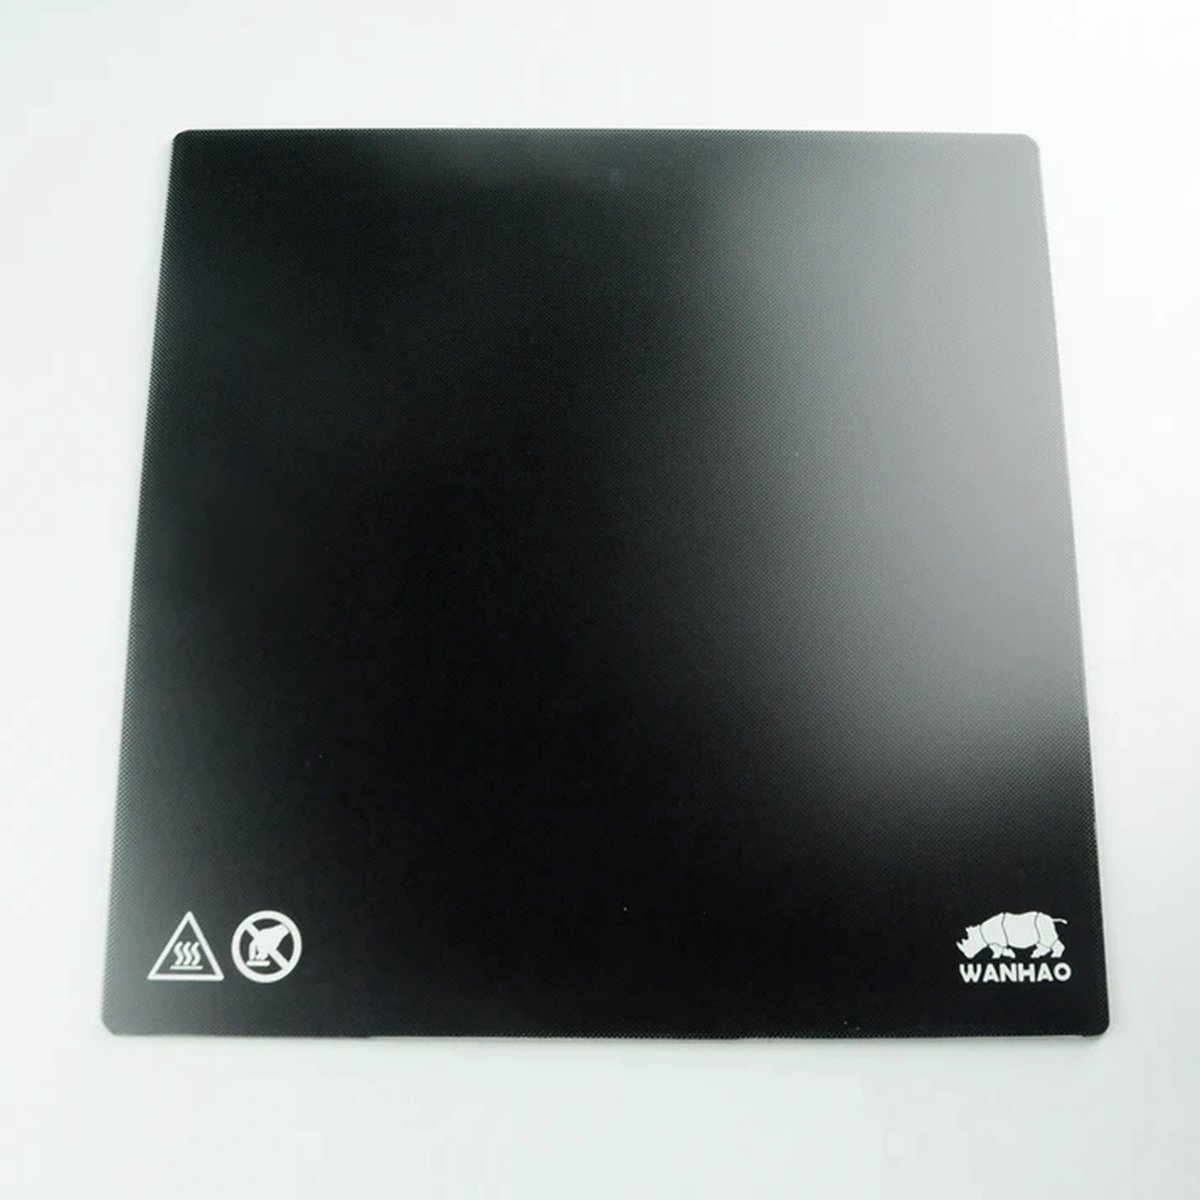 Wanhao - D9 400 carbon crystal glass plate - 425x425mm